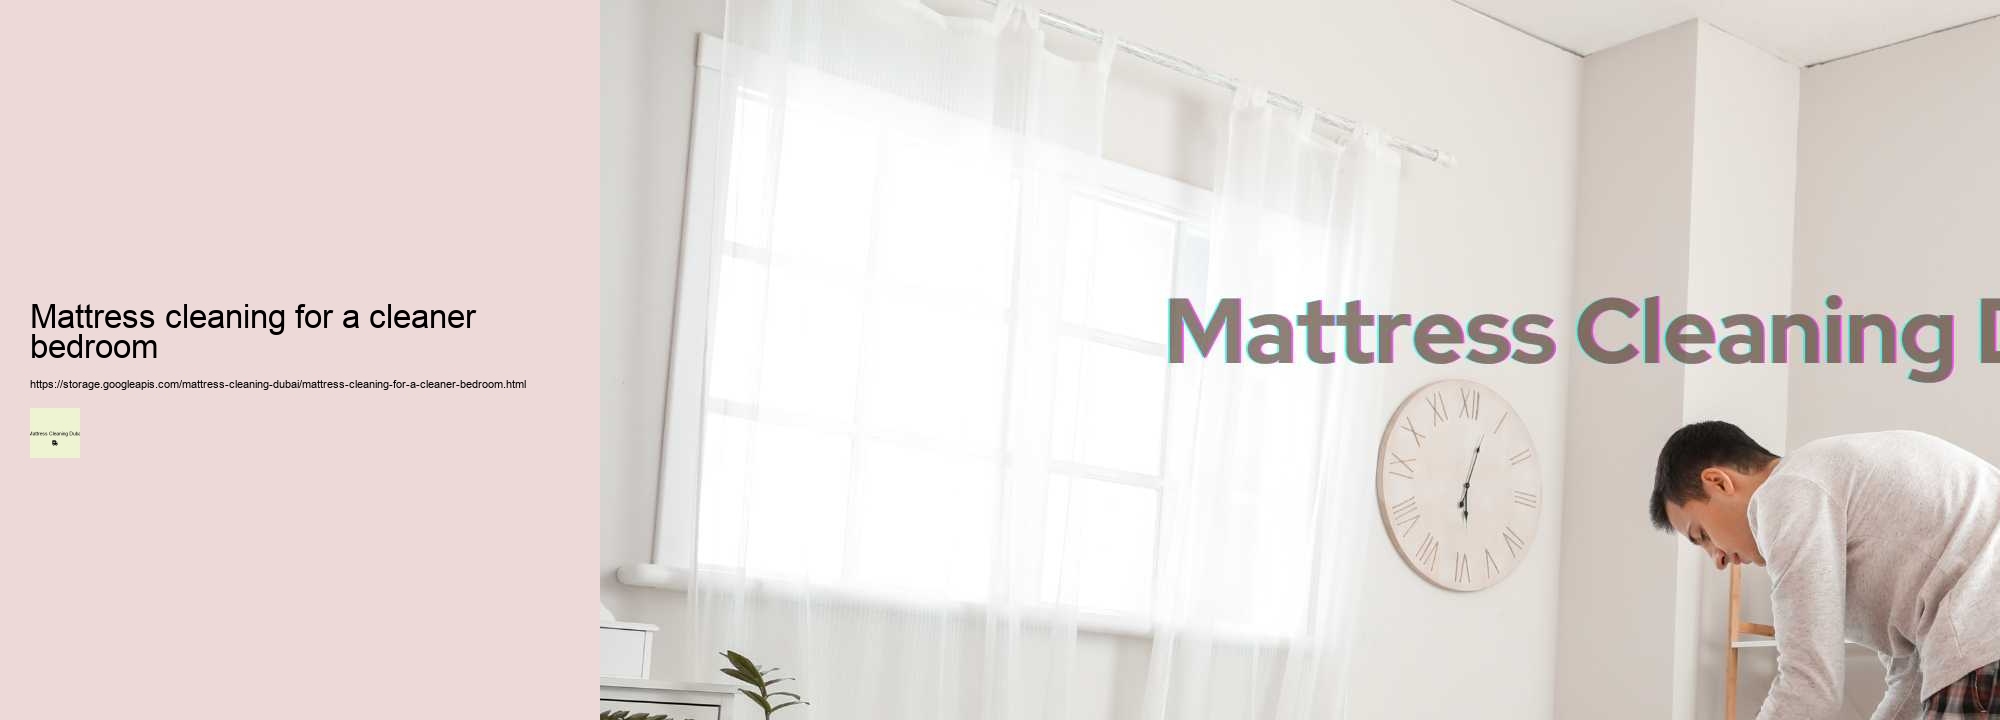 Mattress cleaning for a cleaner bedroom